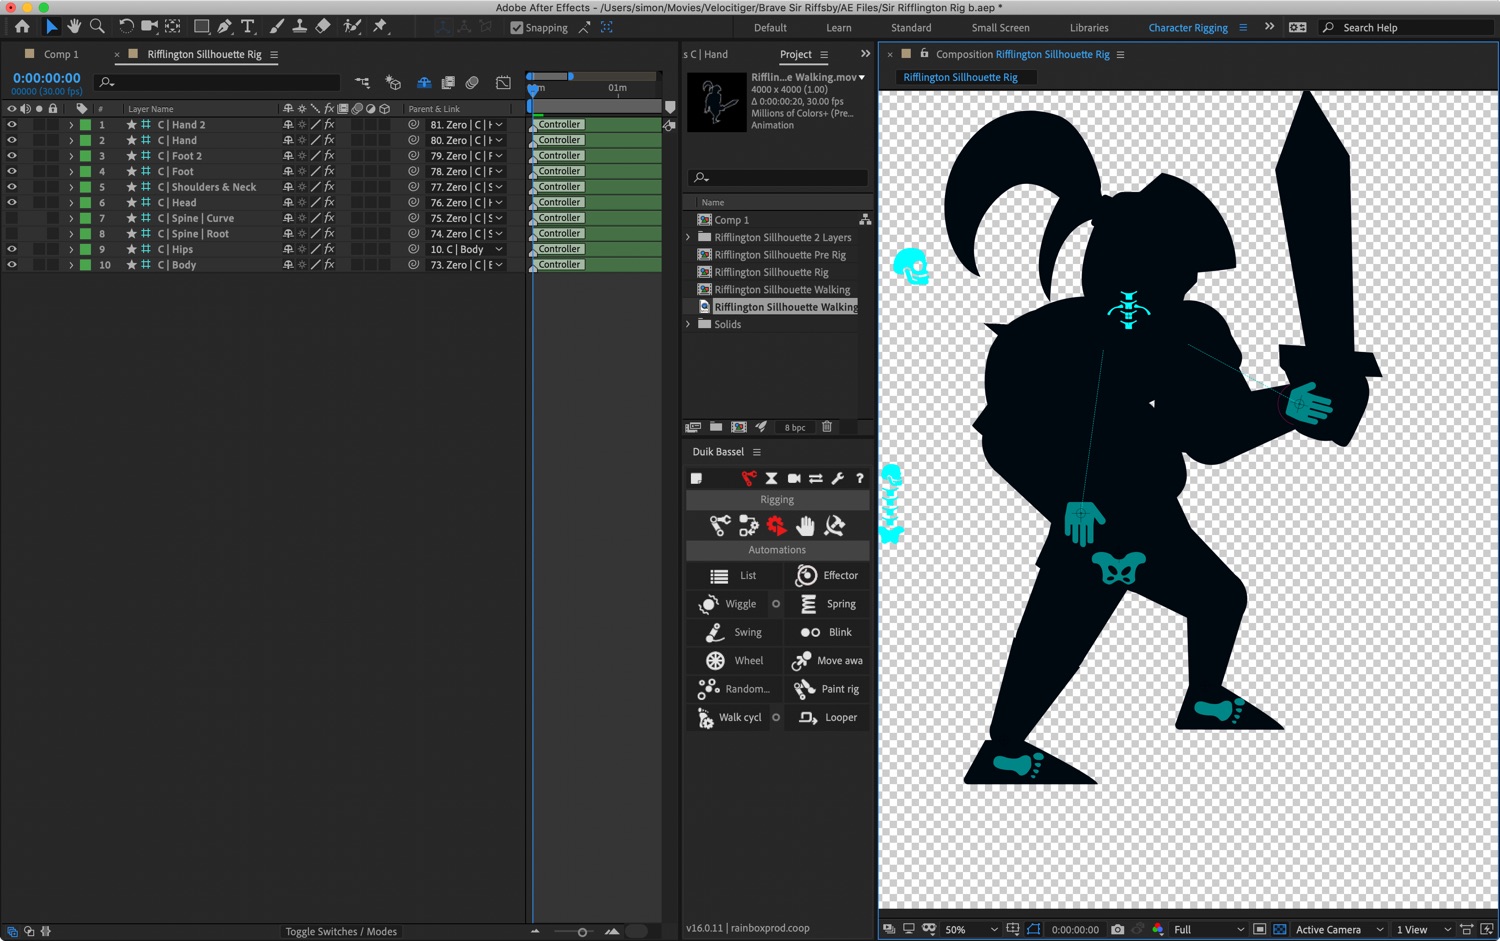 Screenshot of the After Effects UI. In the middle of the screen is a knight silhouette being rigged. It has a bunch of 'bones' and icons representing limbs surrounding it.